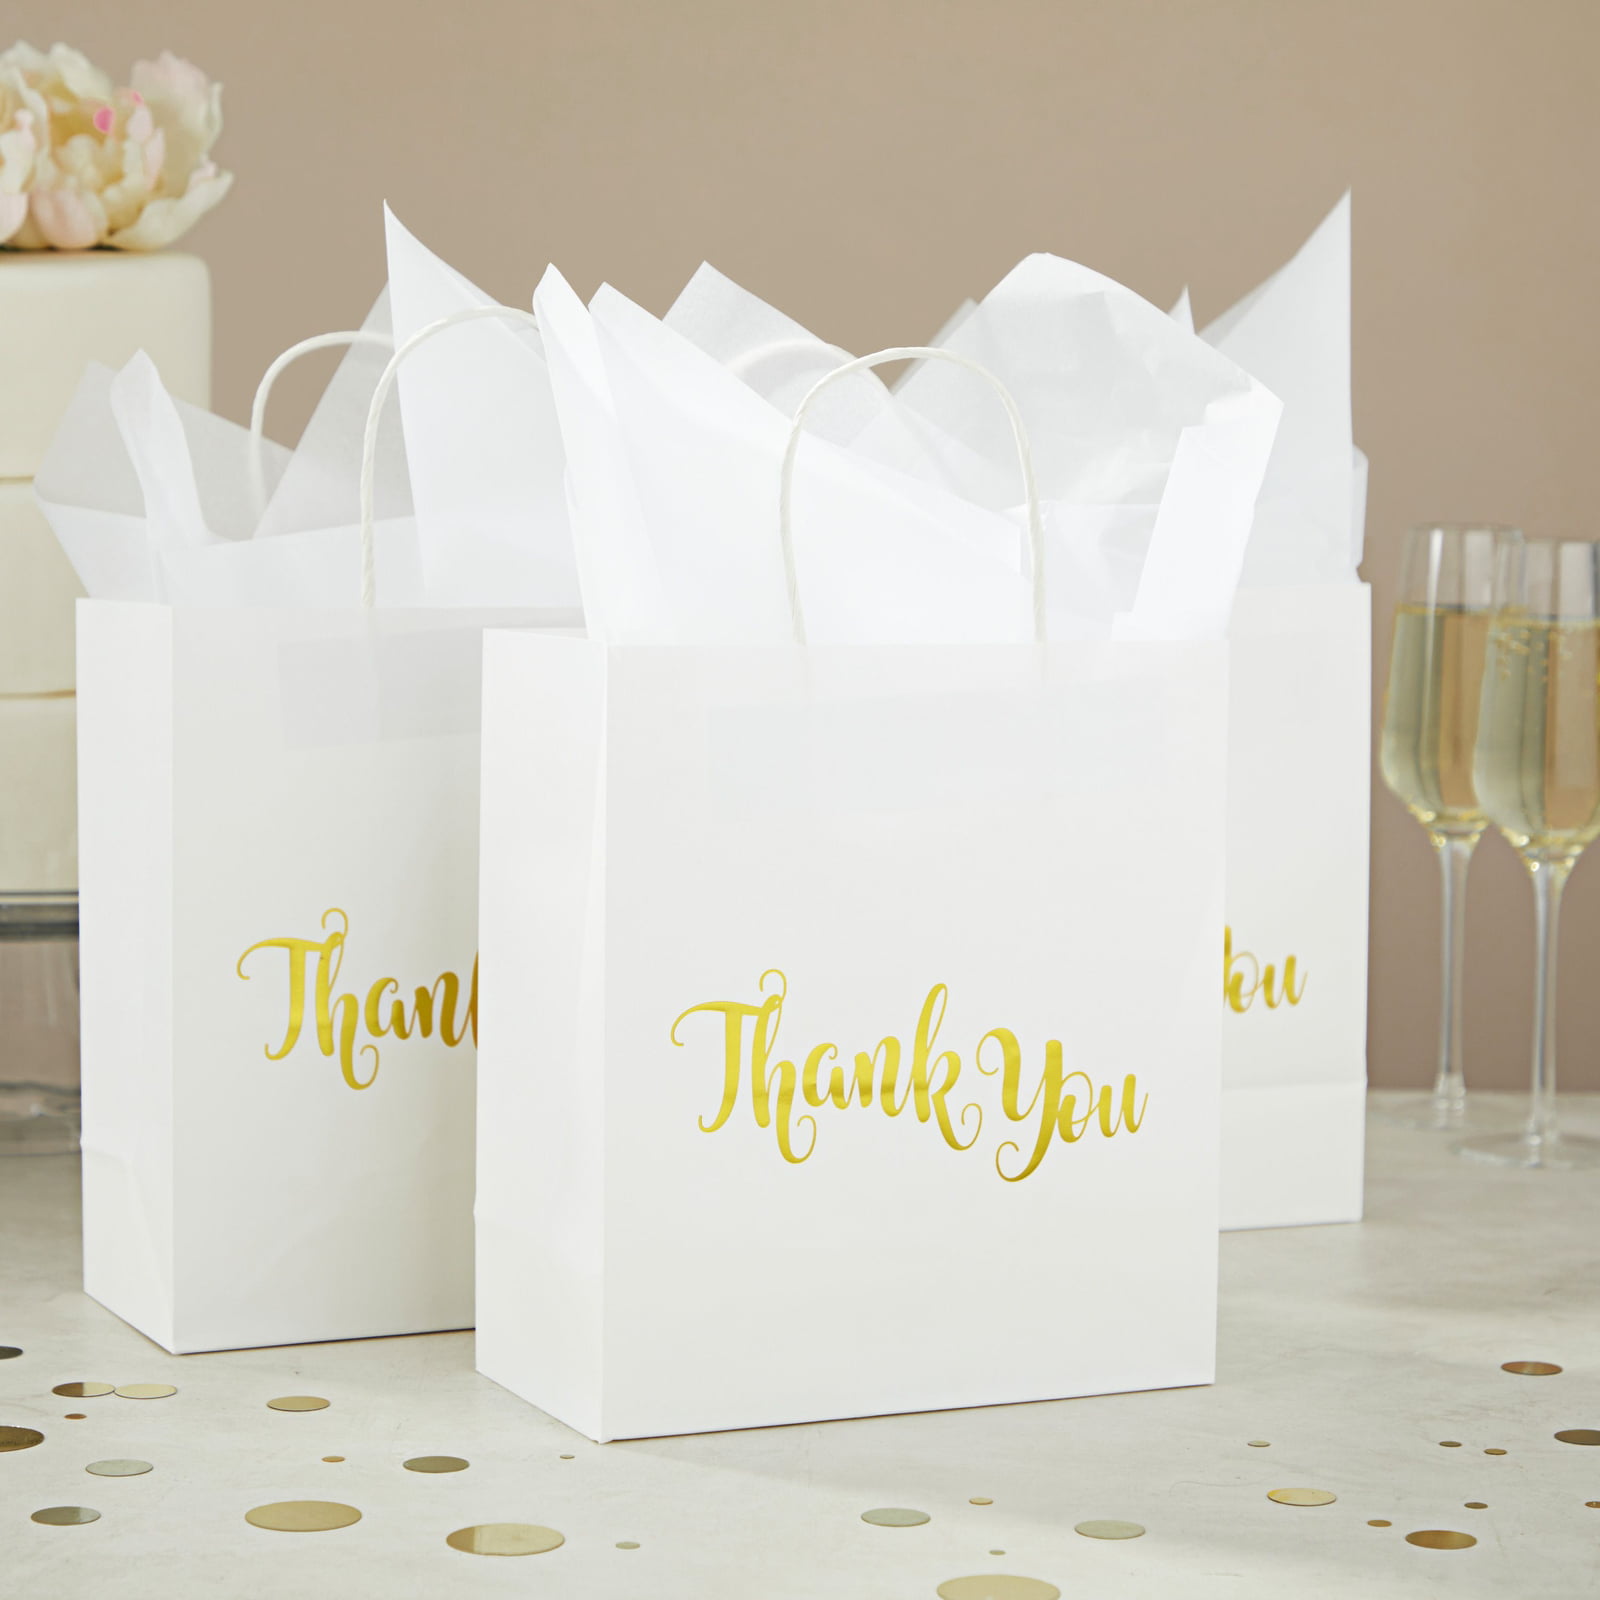 Retail Wedding Favor Party Boutique Baby Shower MESHA 50pcs Thank You Gift Bags With Handles Bulk 8X4.75X10 Rose Design White Kraft Thank You Bags For Business small Merchandise Packaging 